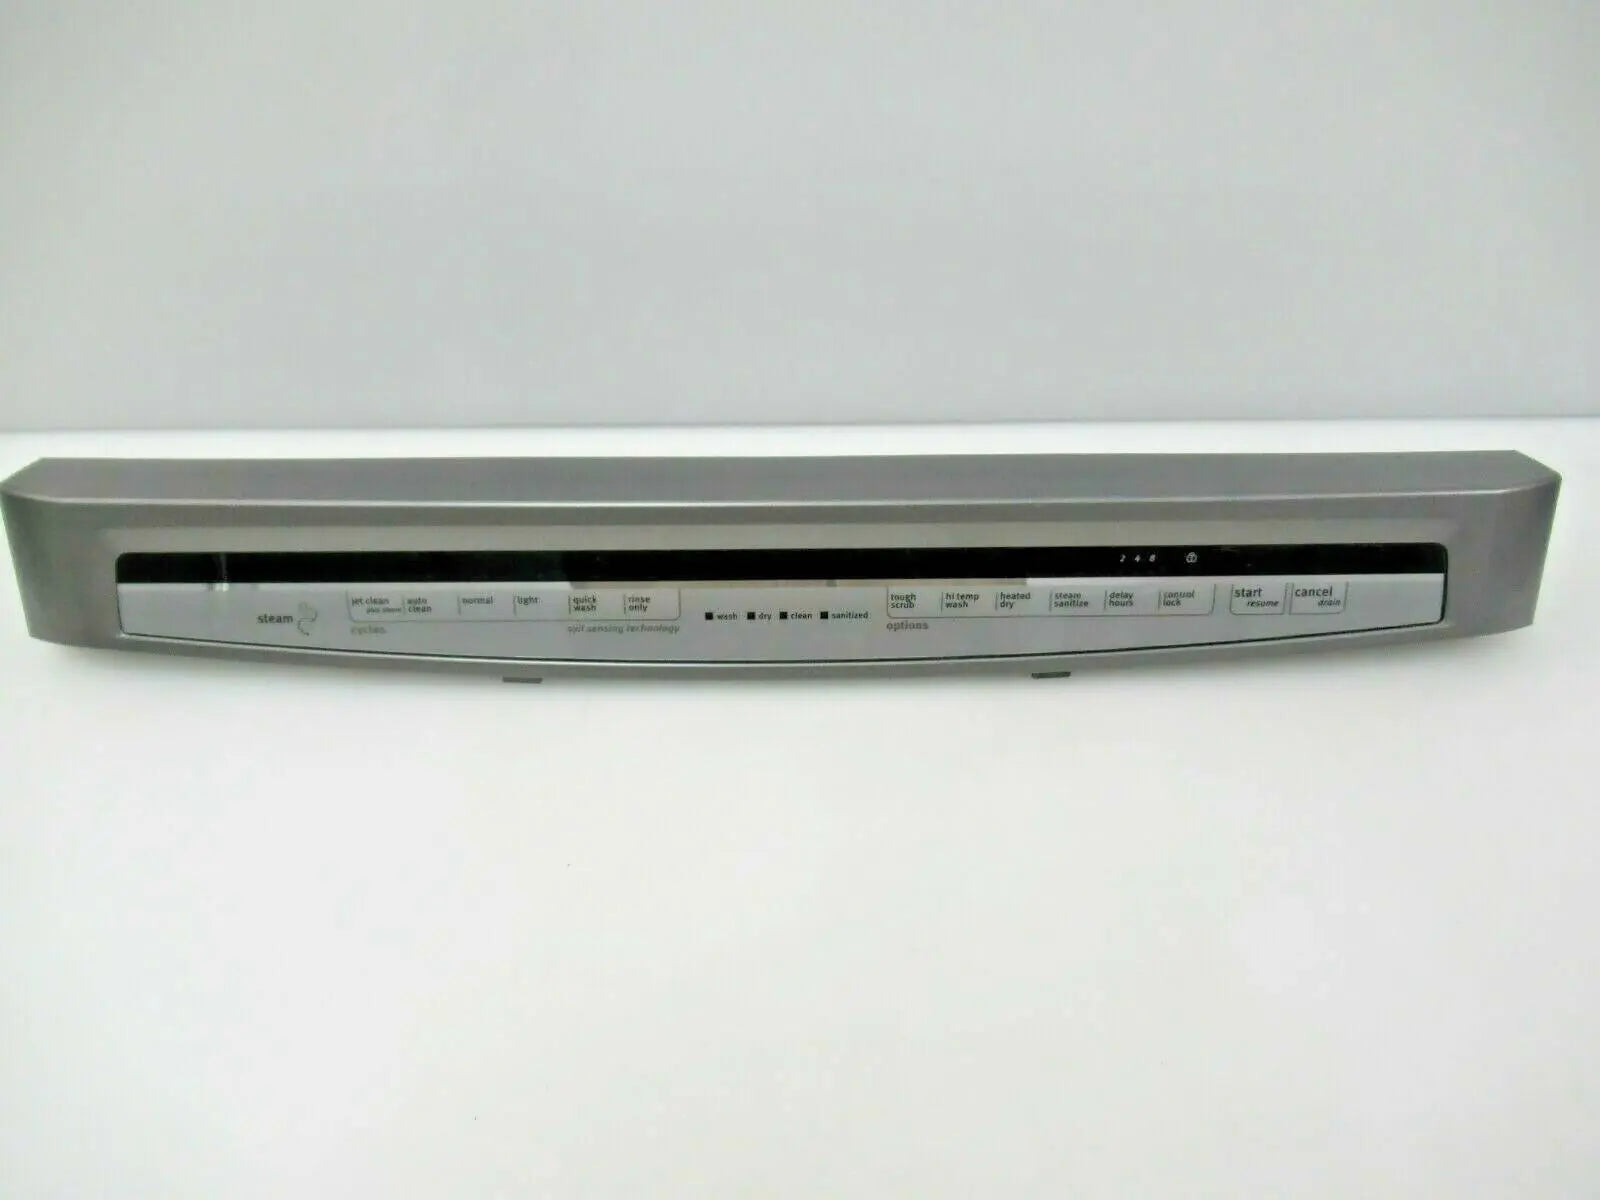 Whirlpool Dishwasher Control Panel, Stainless - W10811169, Replaces: 2312607 4262691 AH11723019 AP5630252 AP5985062 B0743YB6SK EA11723019 EAP11723019 EAP3653291 PS11723019 PS3653291 W10398672 W10475787 W10751547 OEM PARTS WORLD